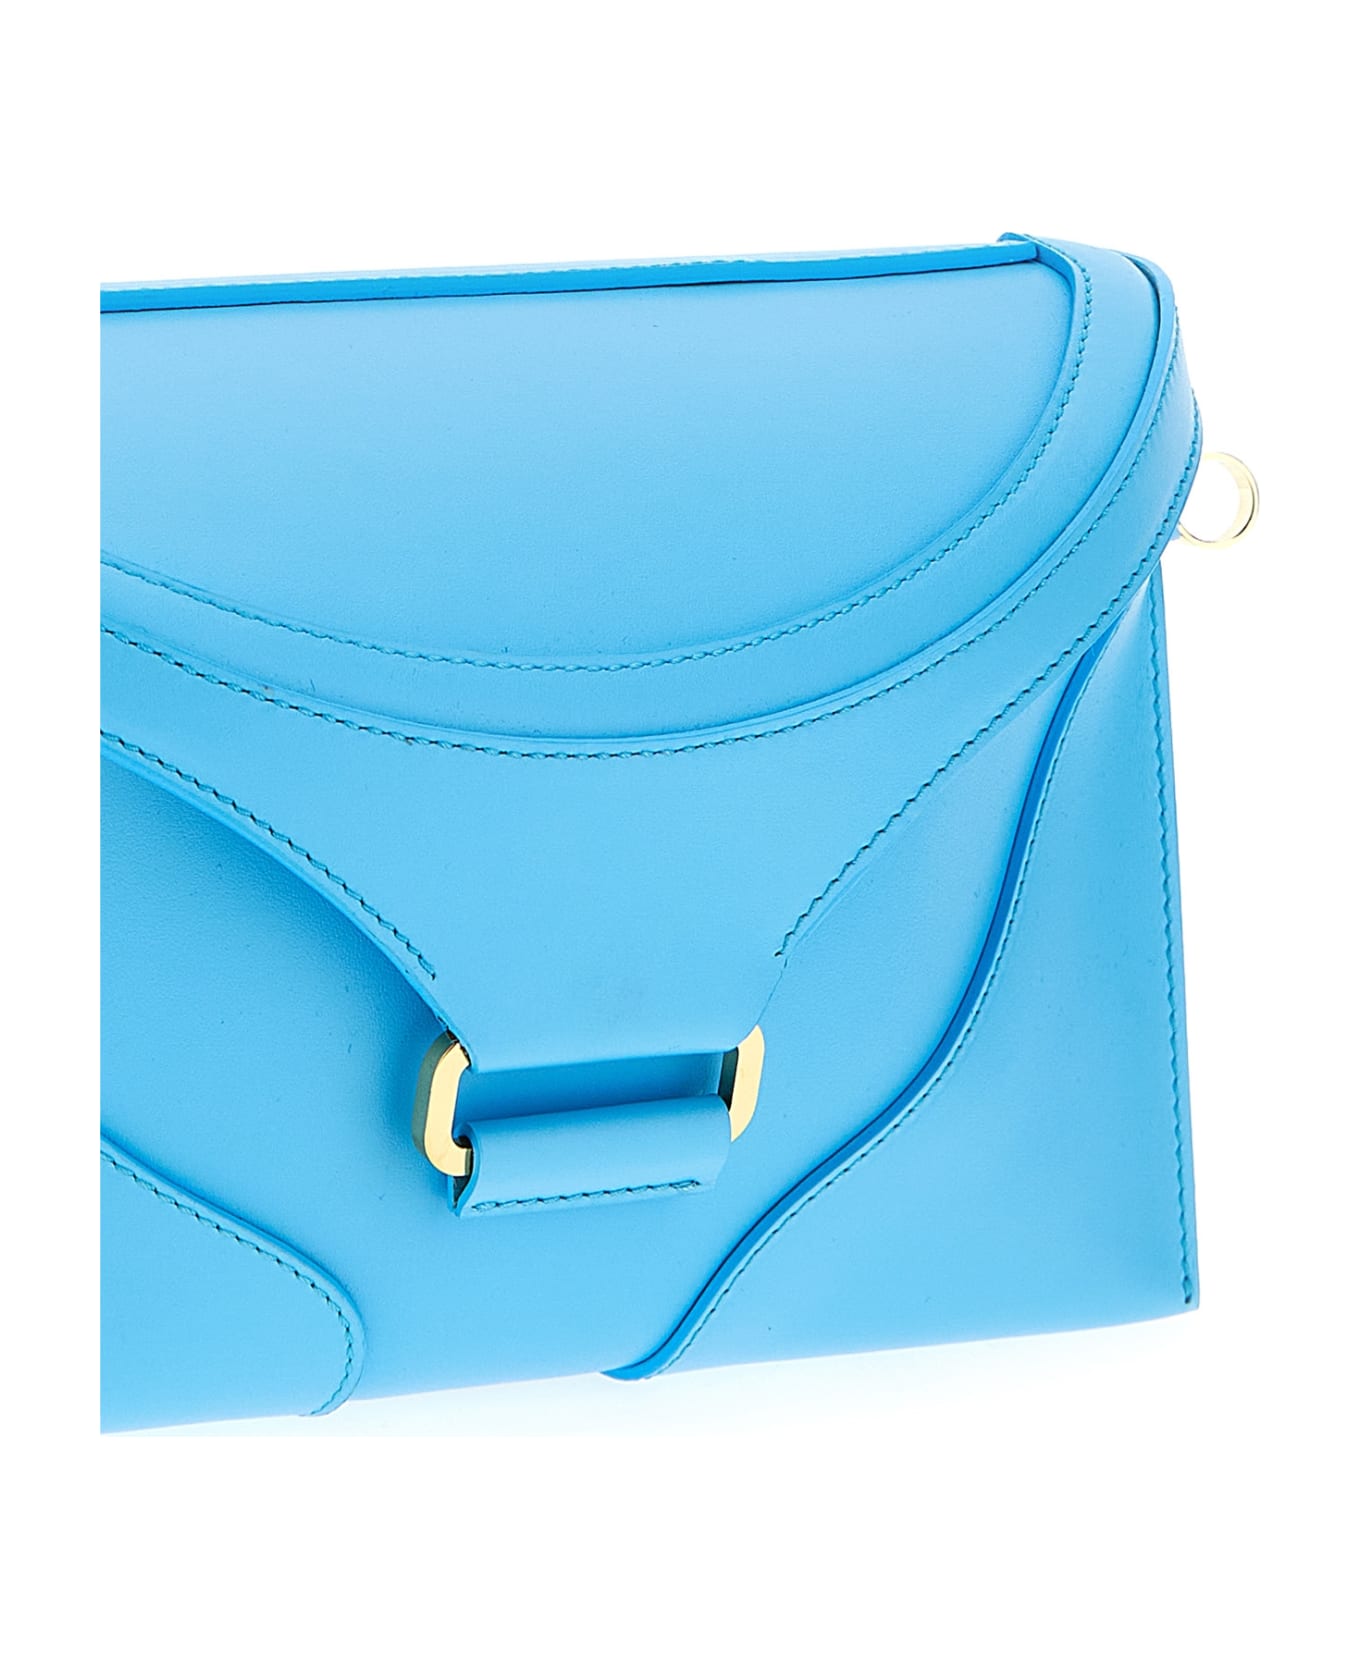 Rodo Clutch Bag With Shoulder Strap - Light Blue ショルダーバッグ